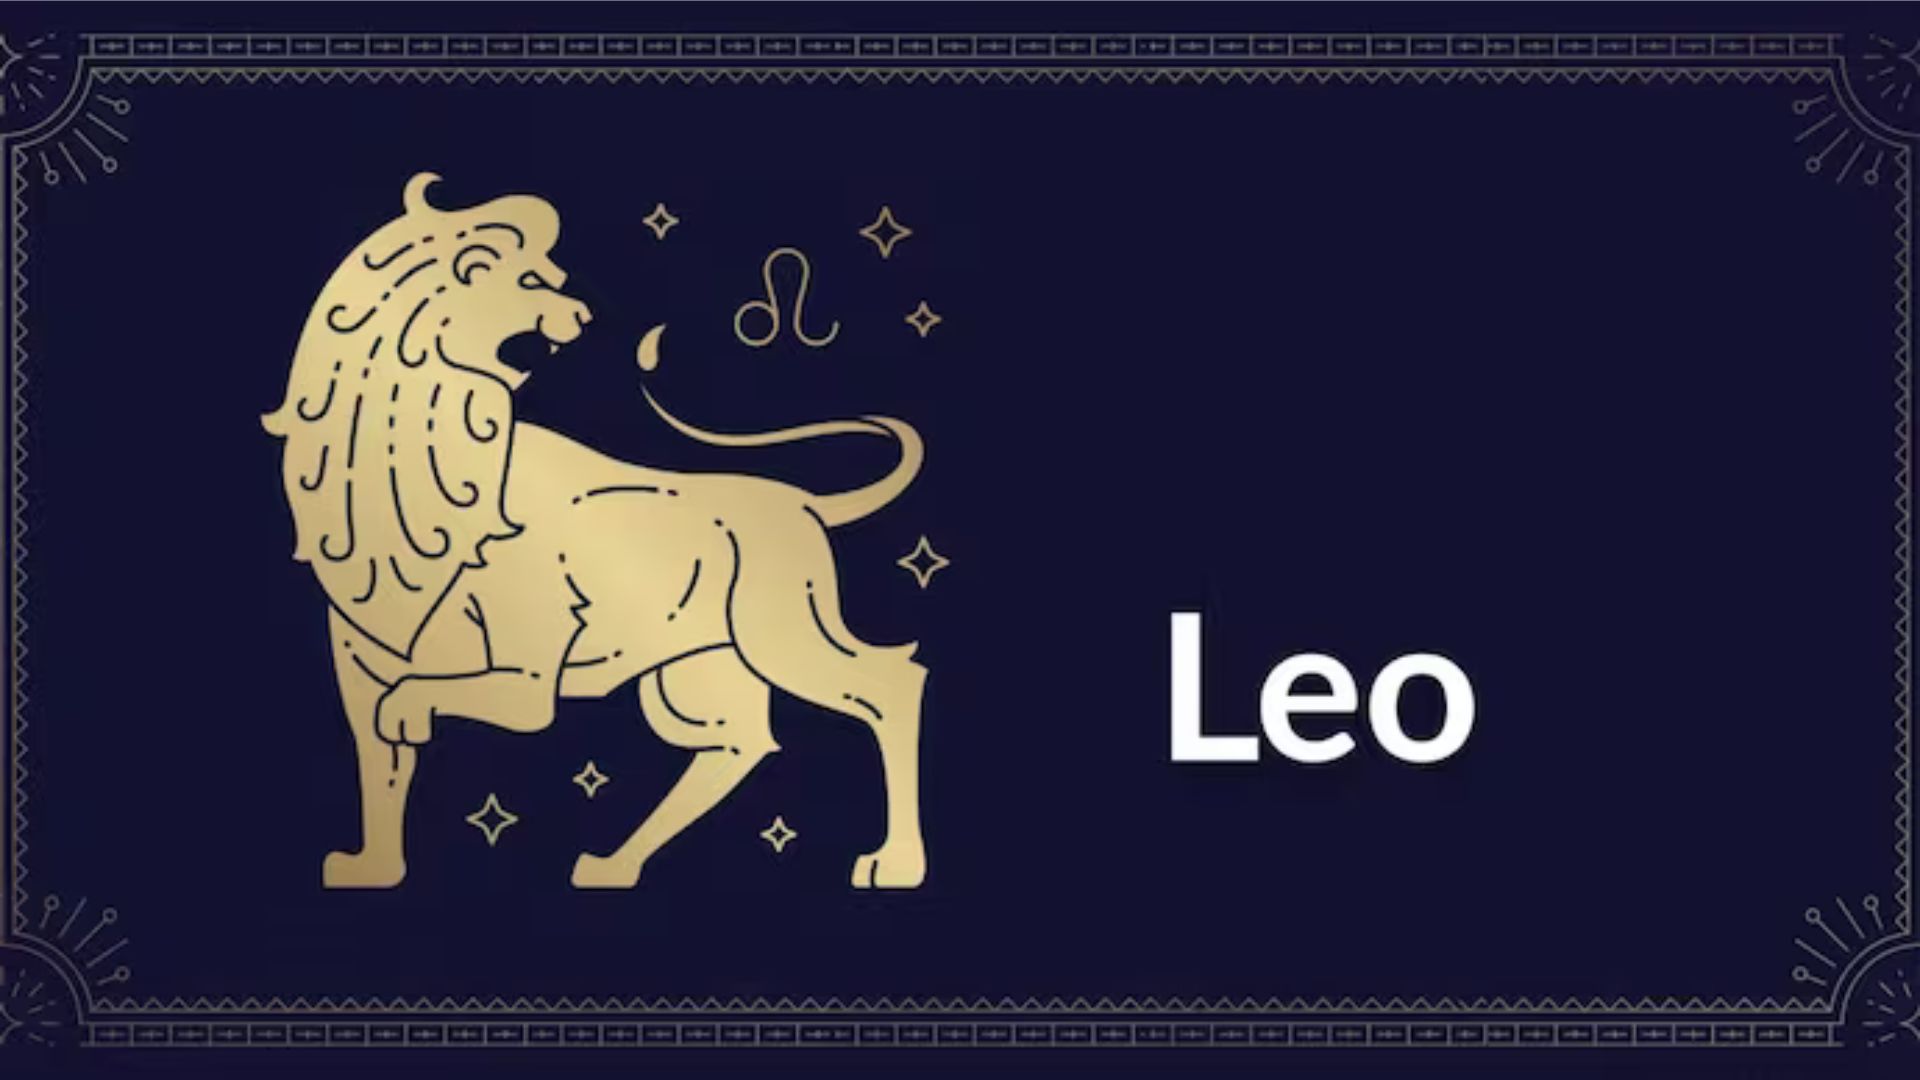 Leo Sign And Its Animal With Purple Color In The Background